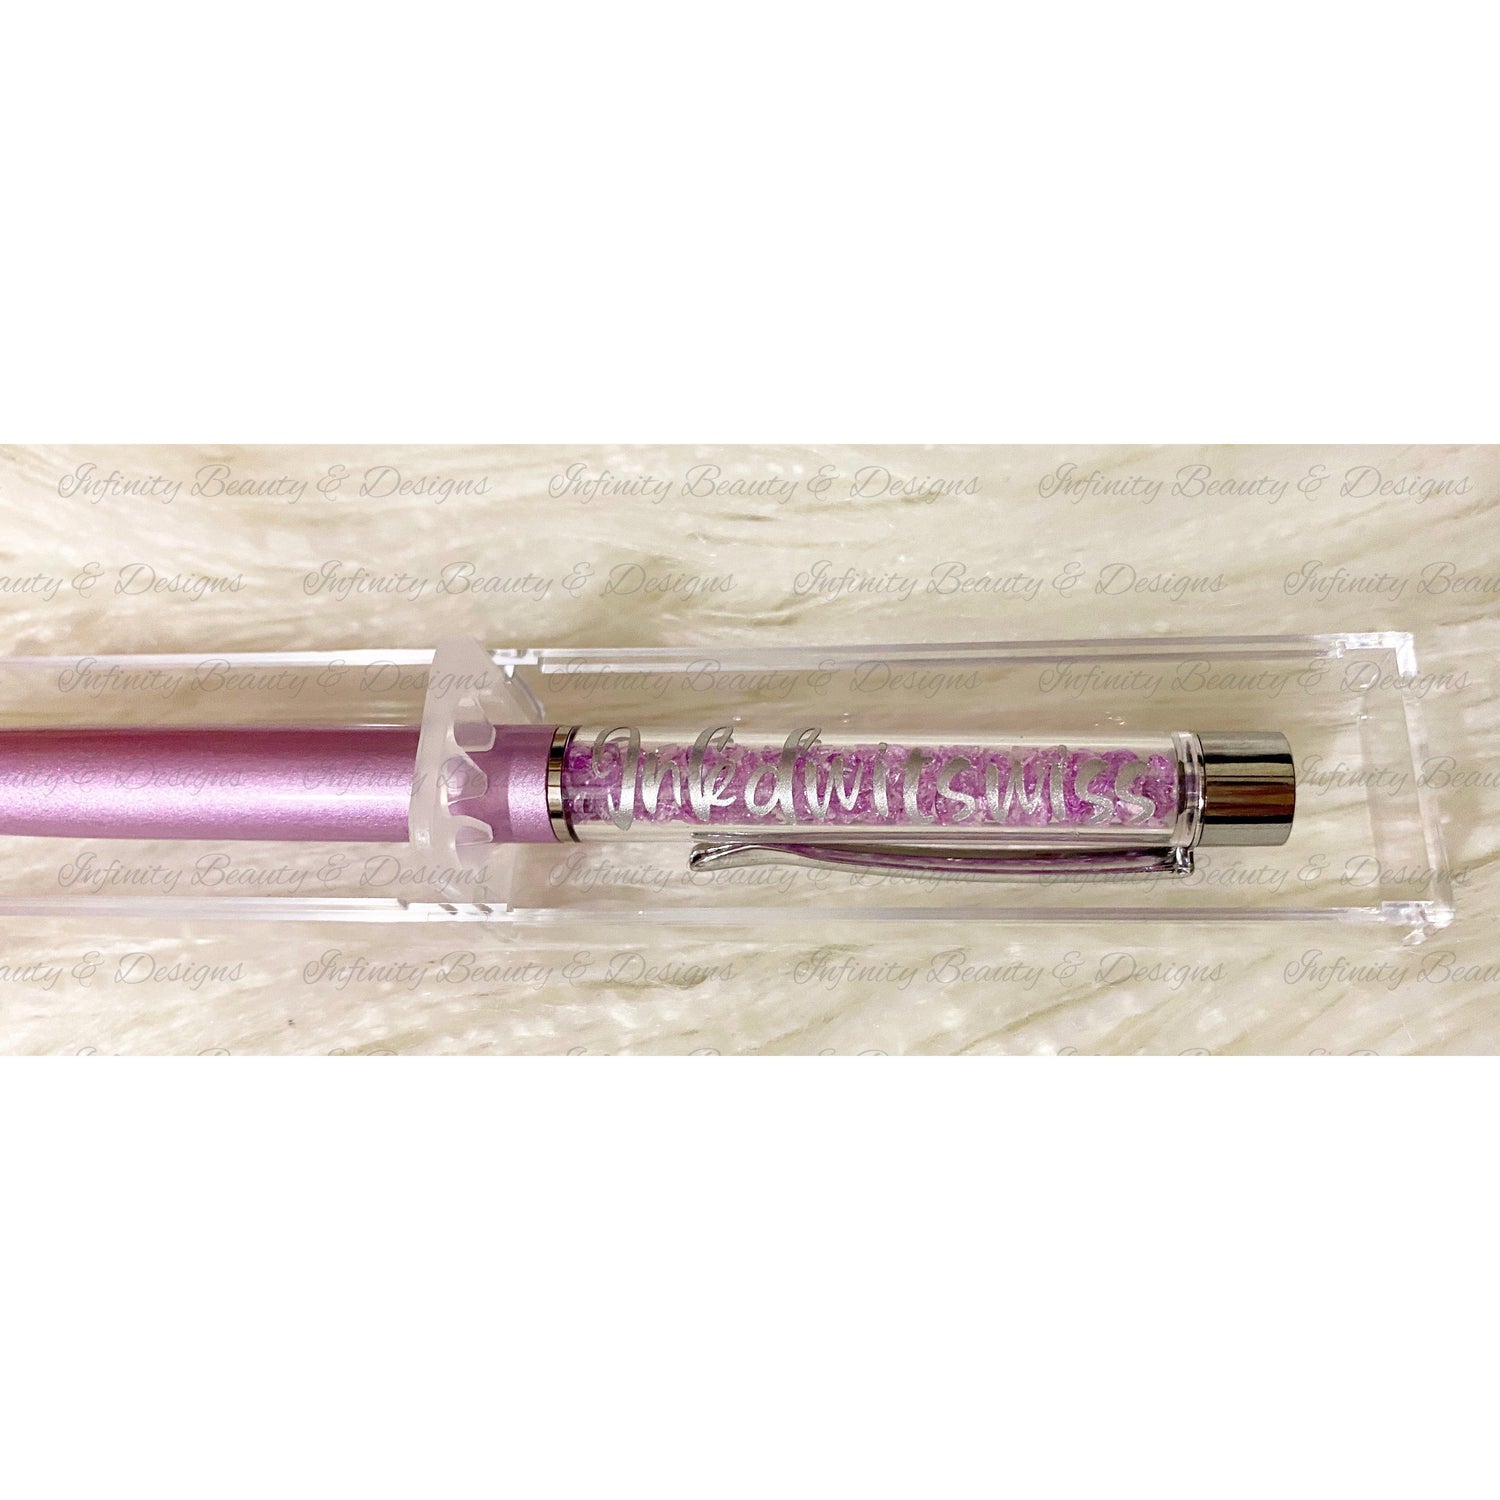 Crystal Filled Pen-Infinity Beauty & Designs